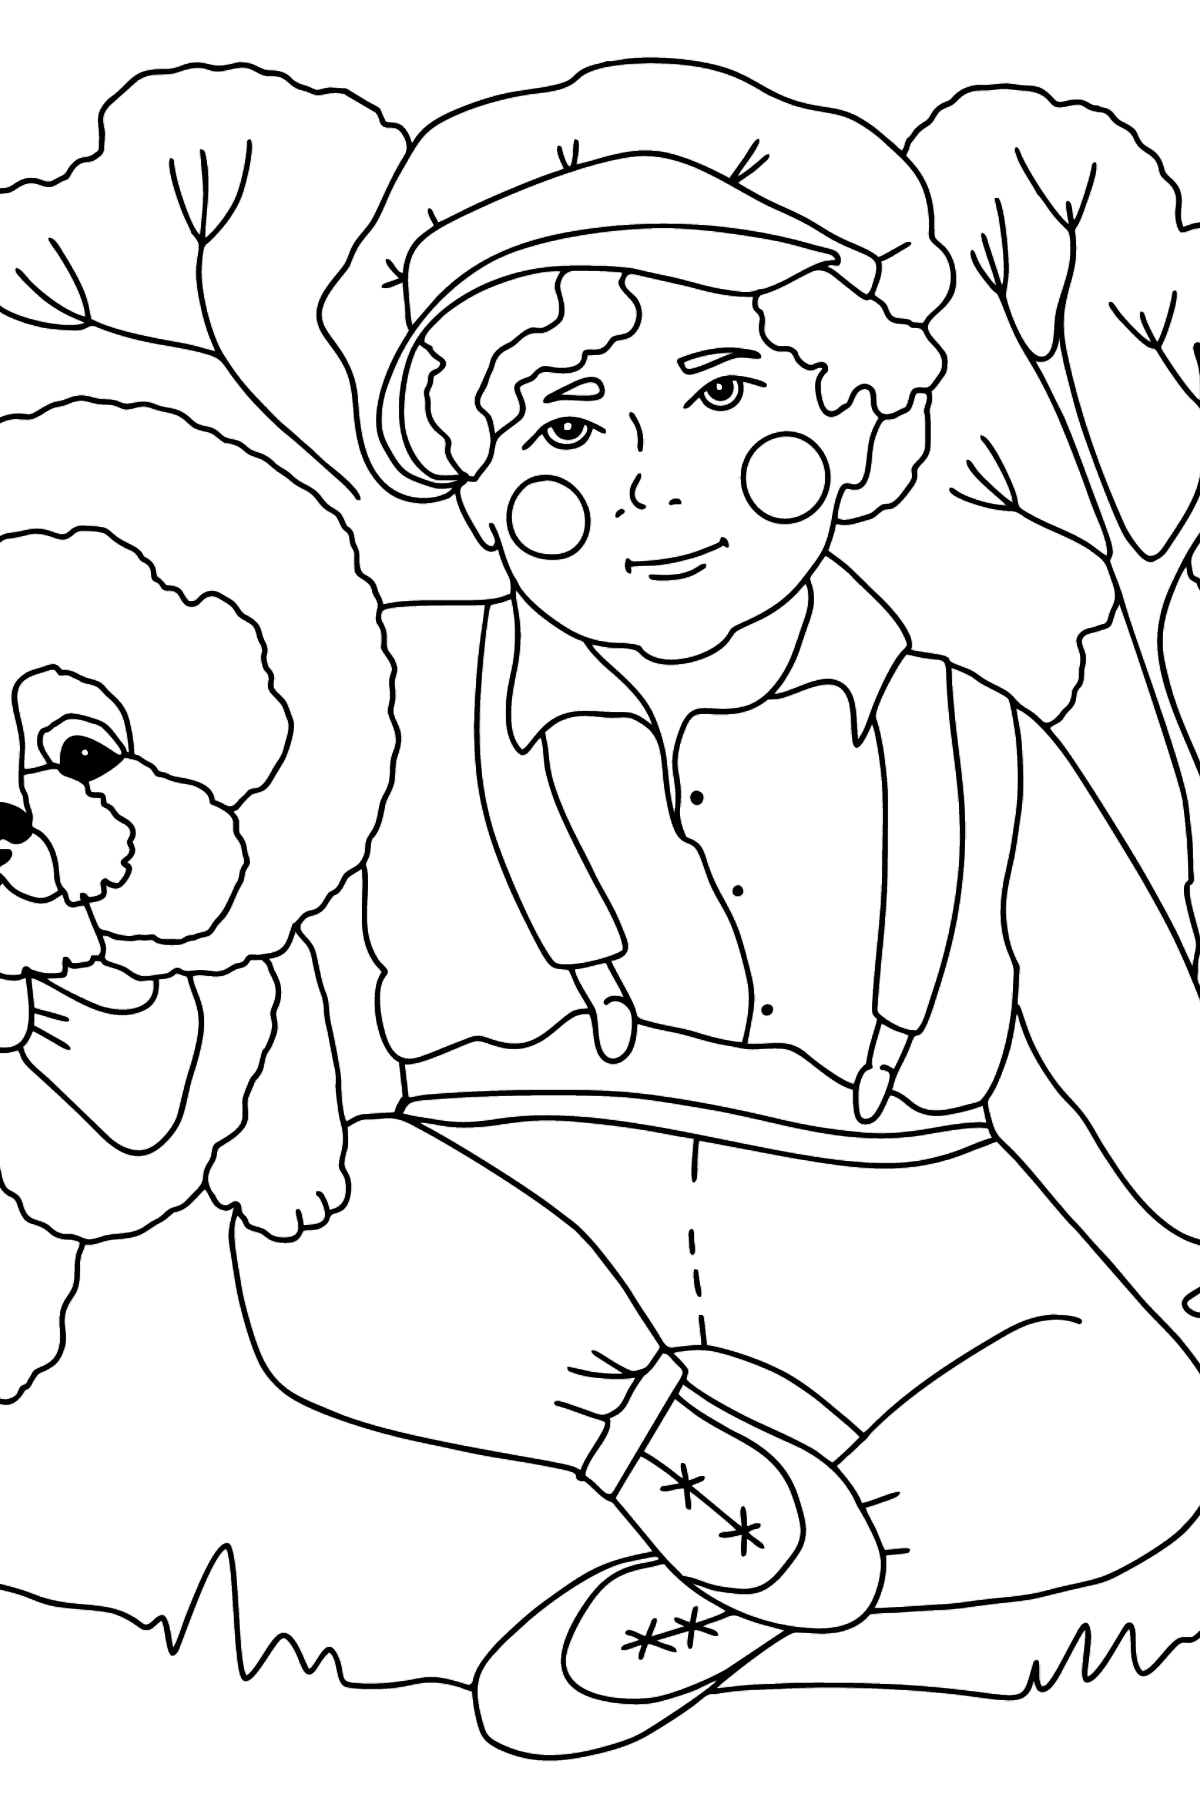 Boy and Biron coloring page - Coloring Pages for Kids